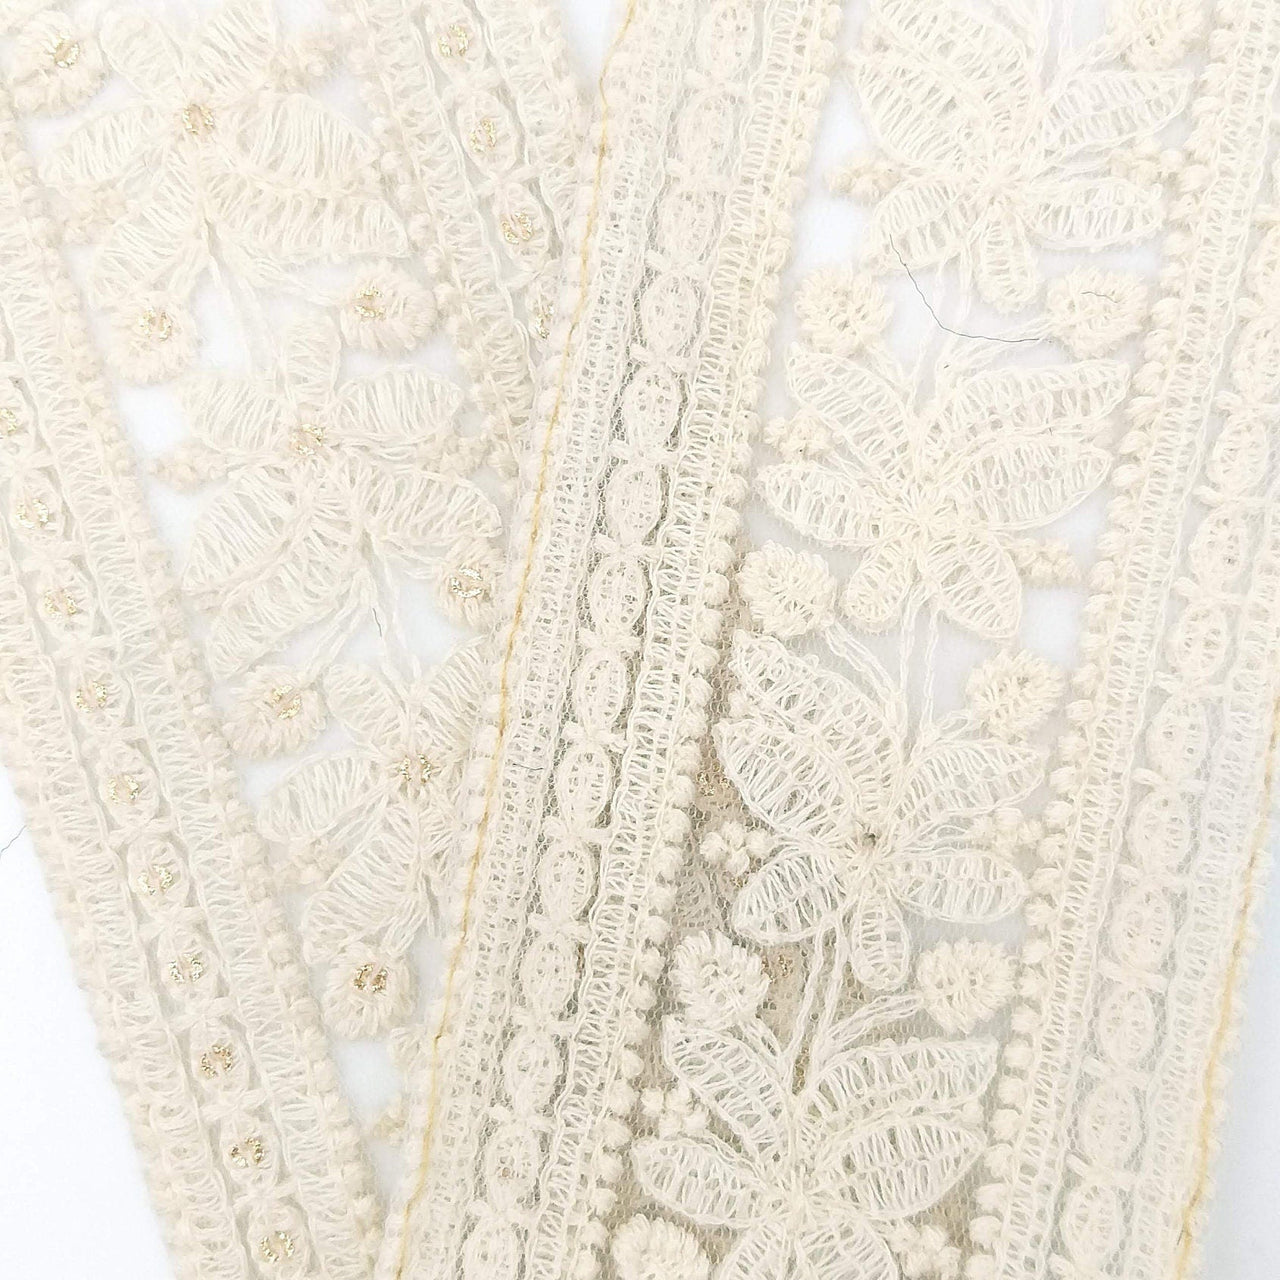 White Soft Net Lace Trim With Floral Embroidery And Gold Sequins, Sequinned Trim, Wedding Trim Bridal Trim